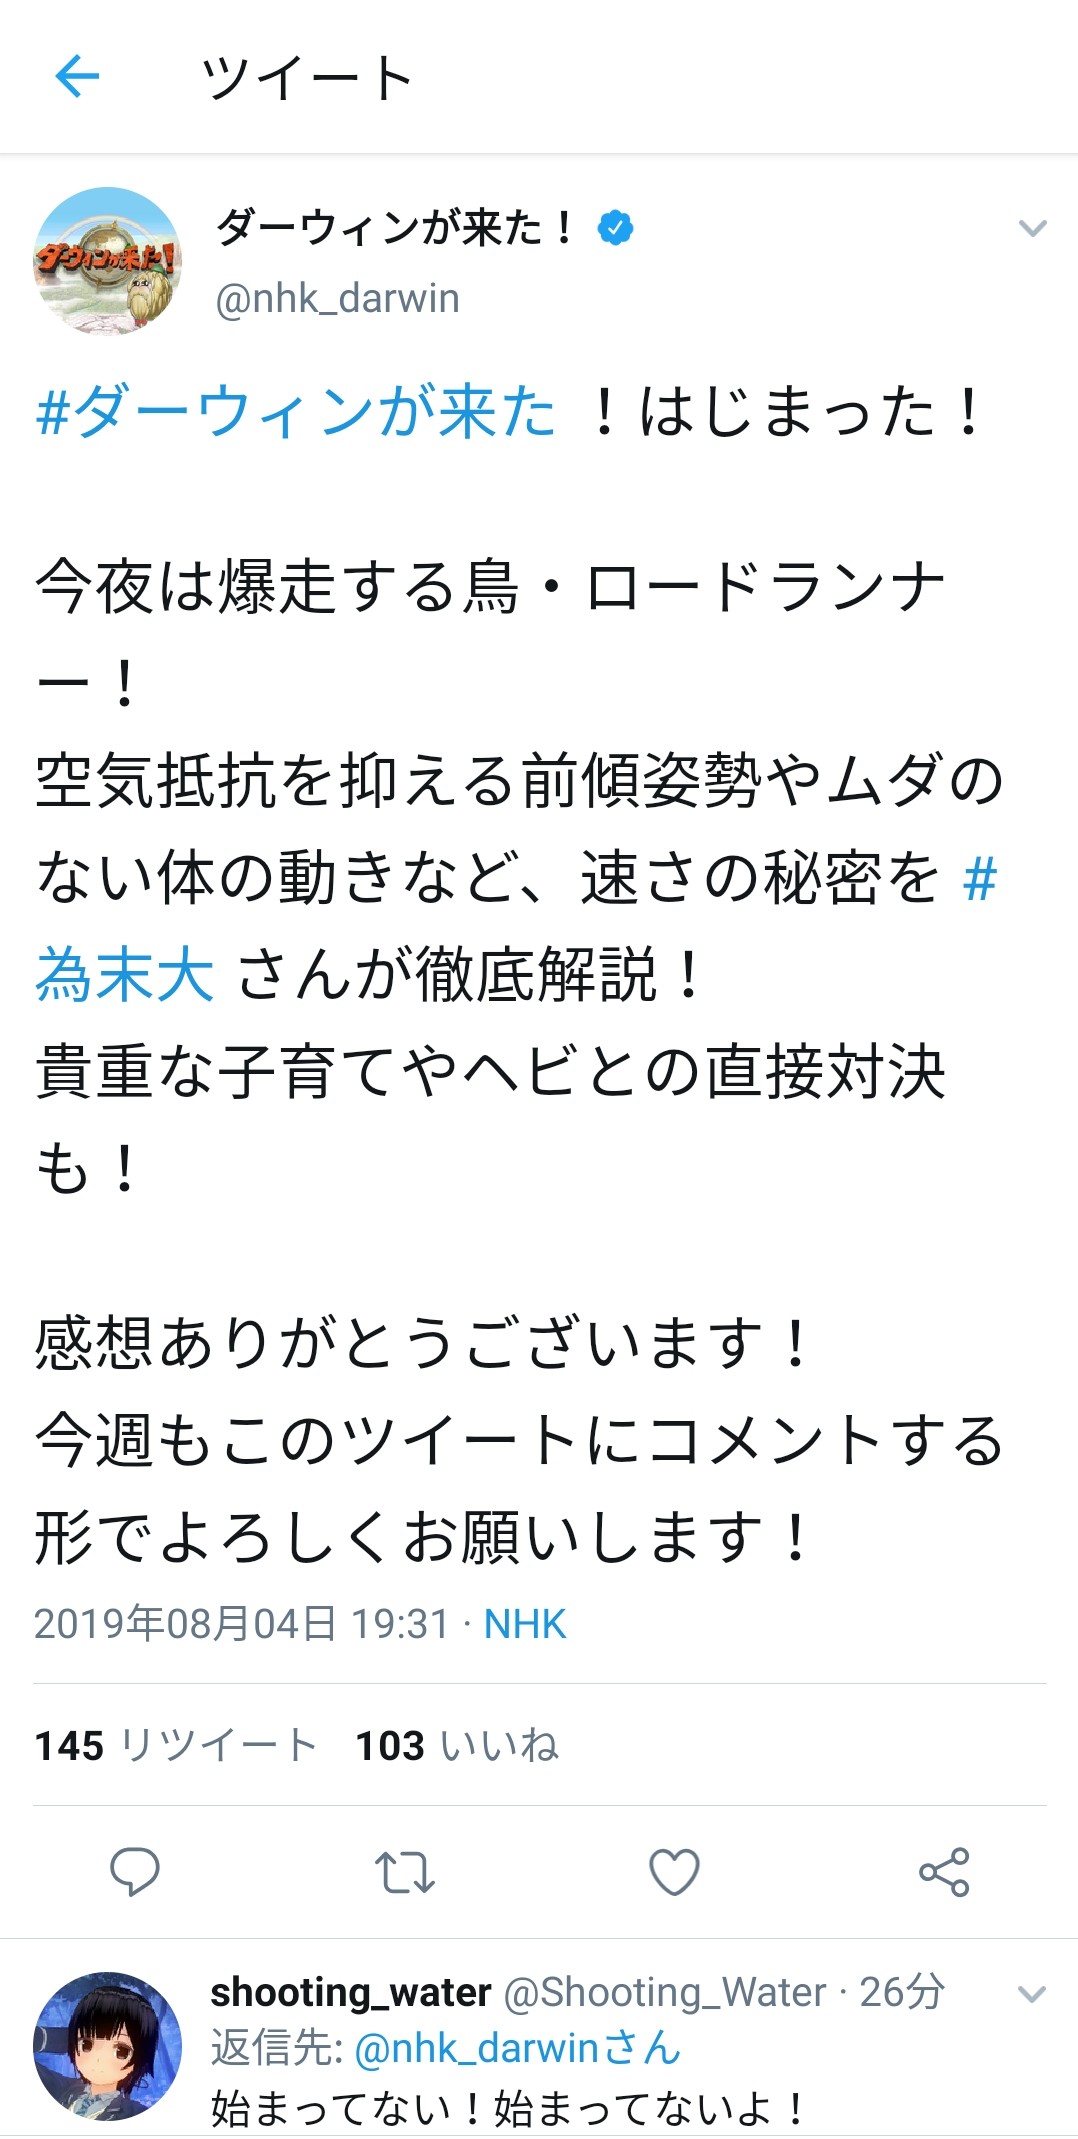 [Sad news] NHK, wwwwwwwwwwwwwwwwwwwwwwww the program twitter because of the earthquake resulting in it Barre is a bot